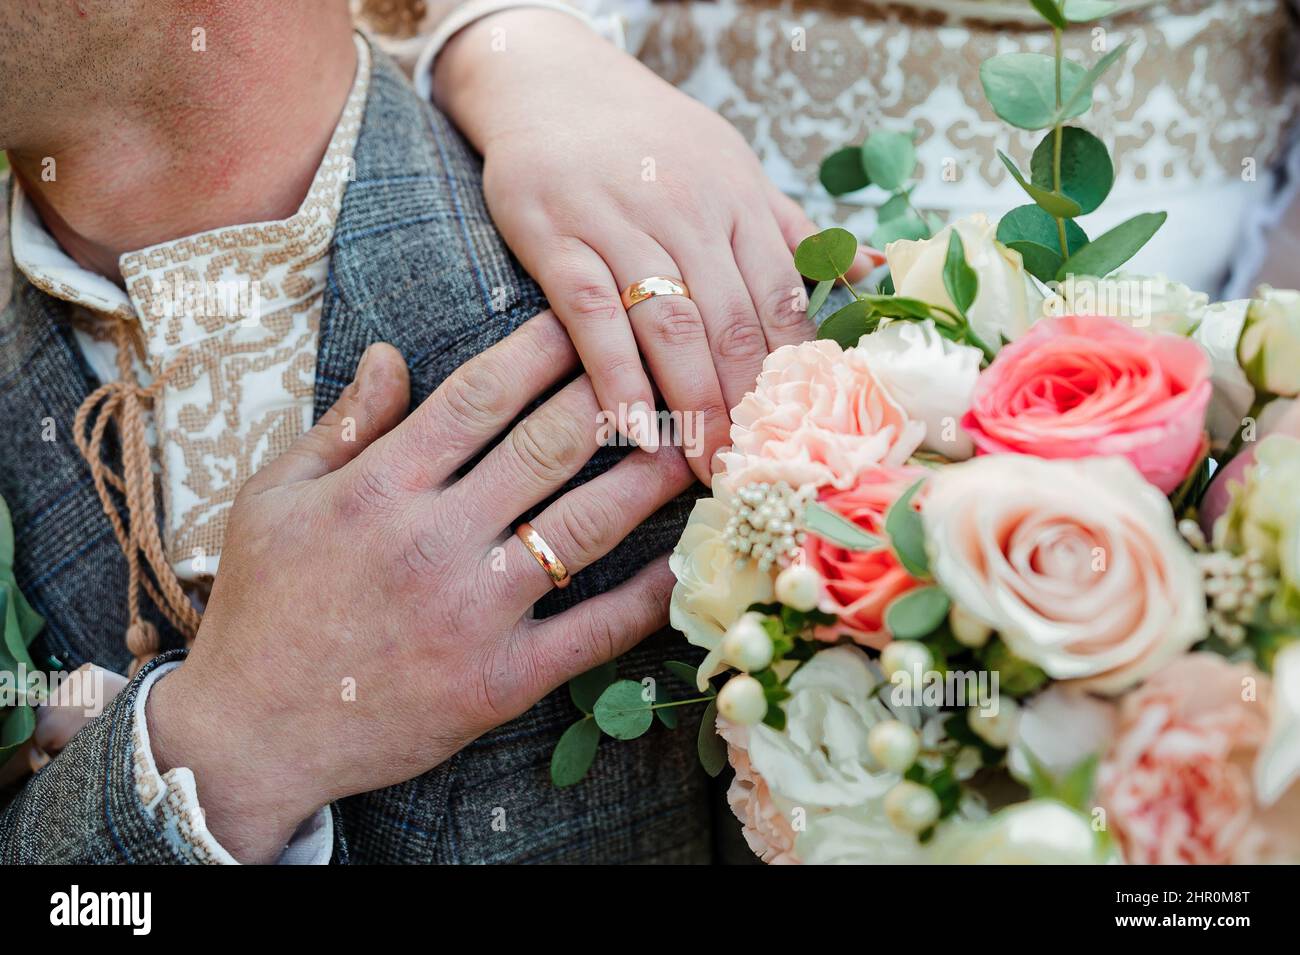 Why Wedding Rings Are Worn on the Left Hand? Which Hand Is Right?